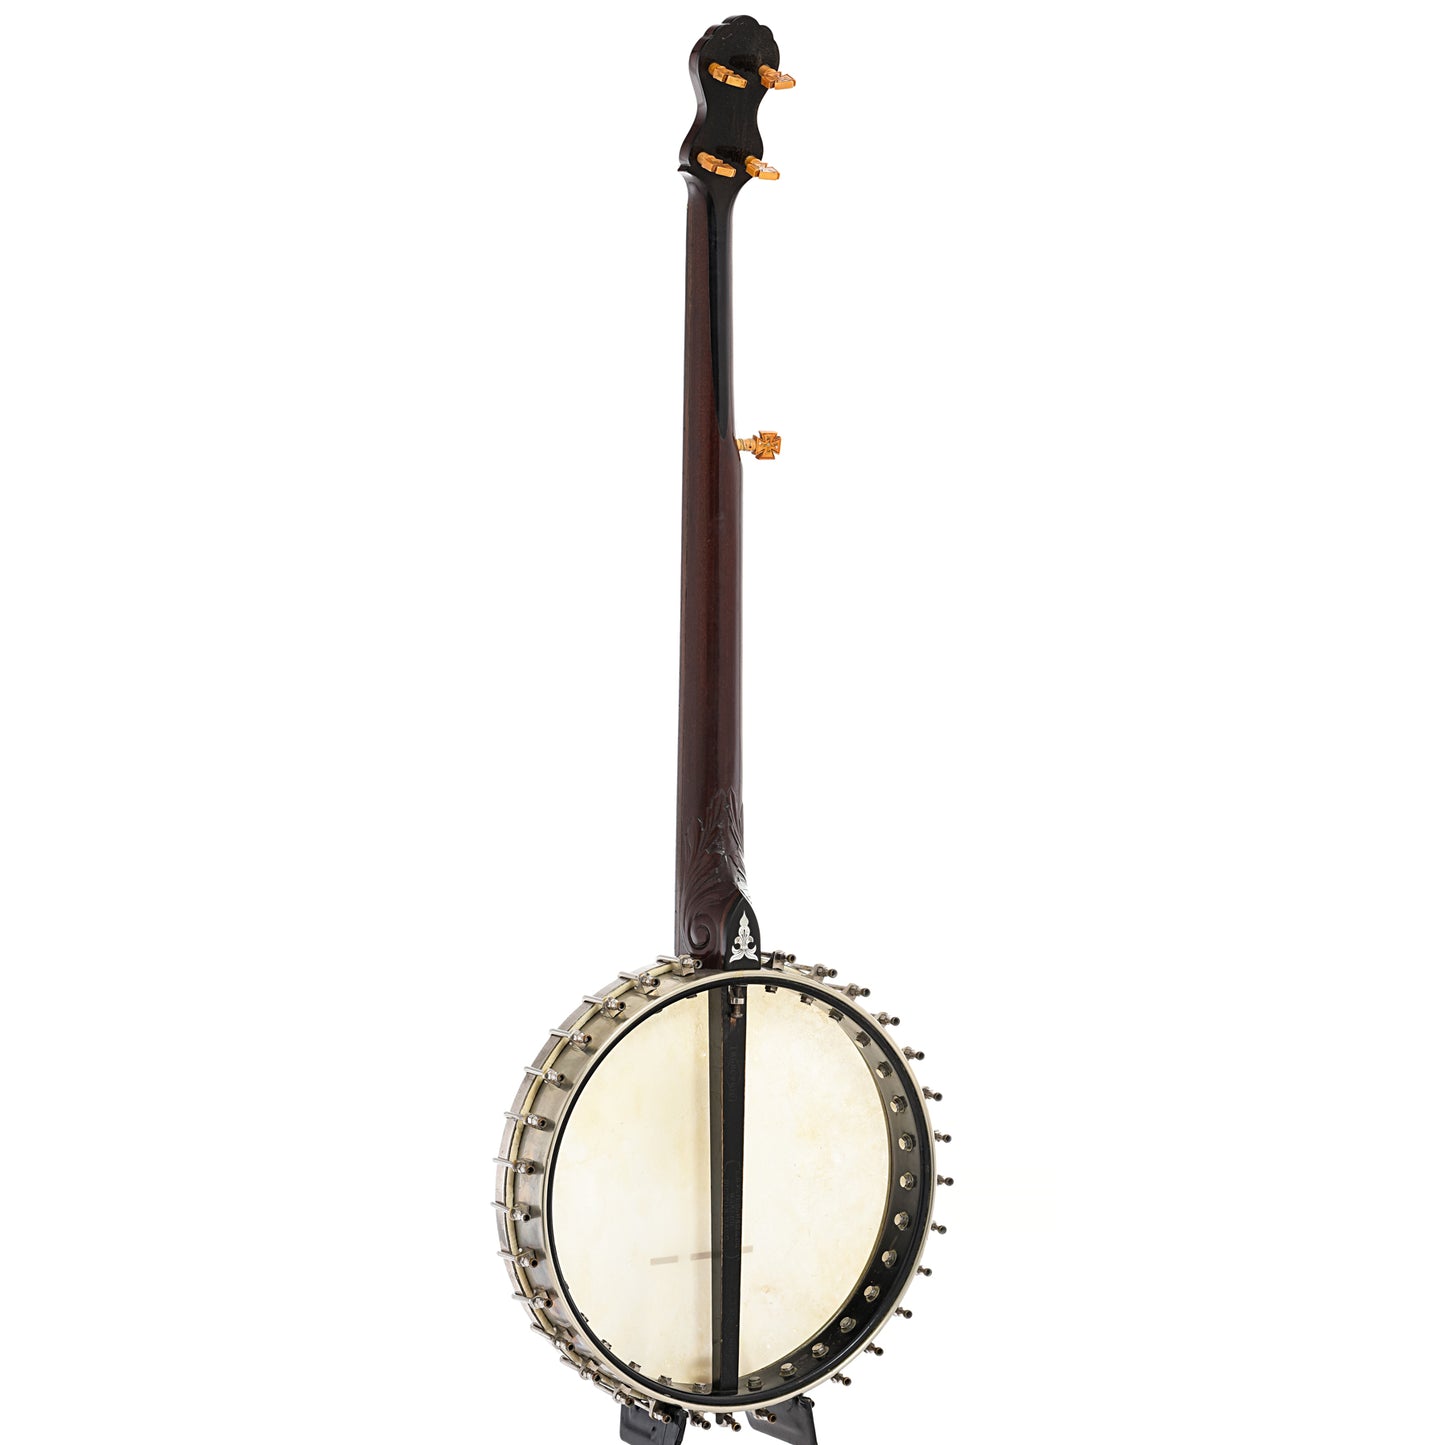 Full back and side of A.C. Fairbanks Electric #3 Openback Banjo (c.1892-93)